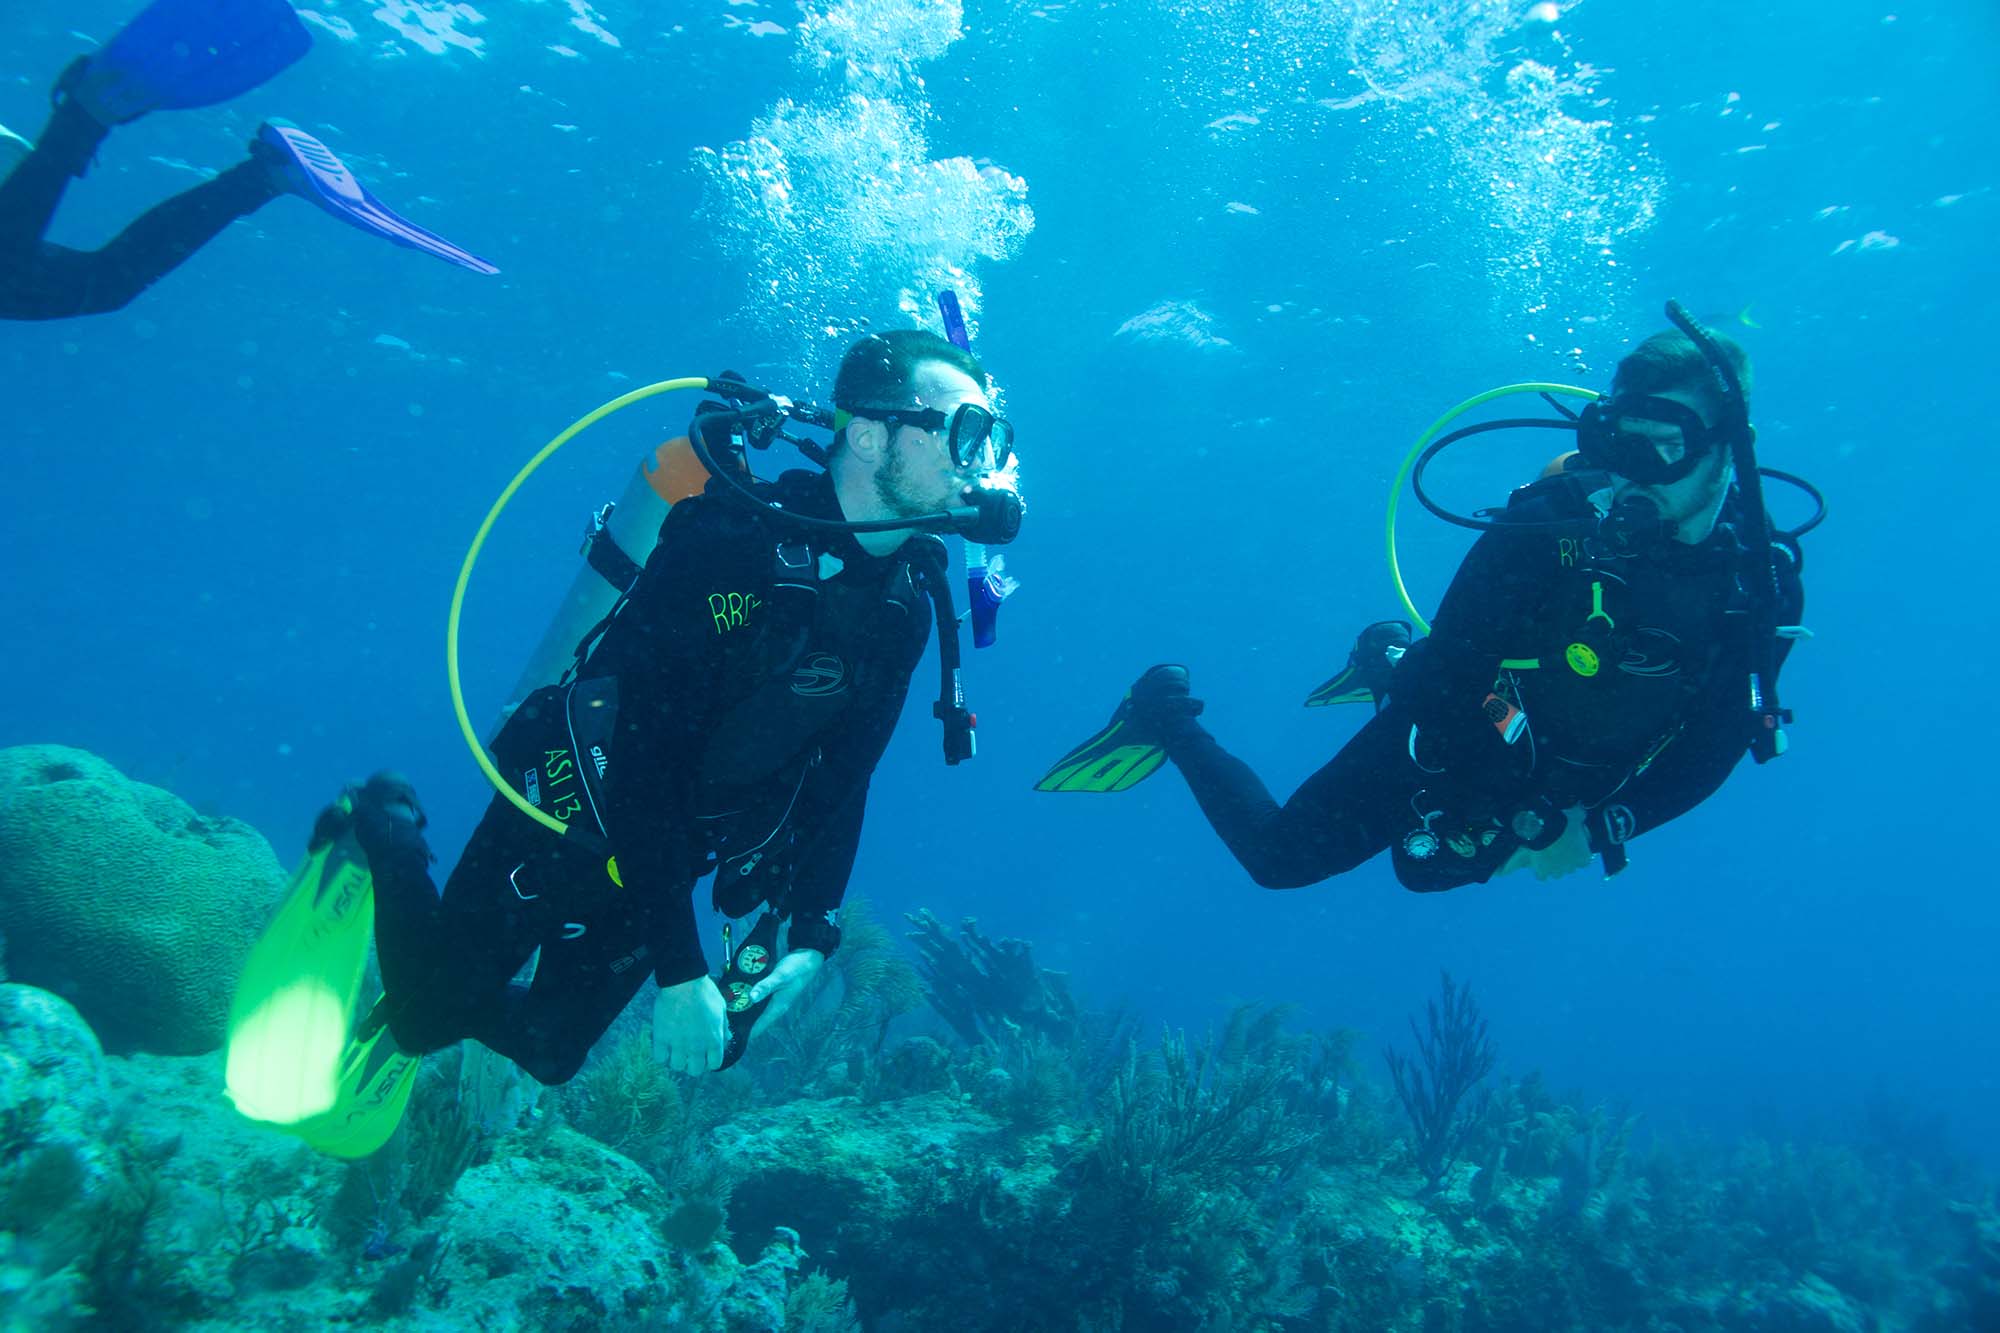 Scuba divers swimming above the ocean reefs